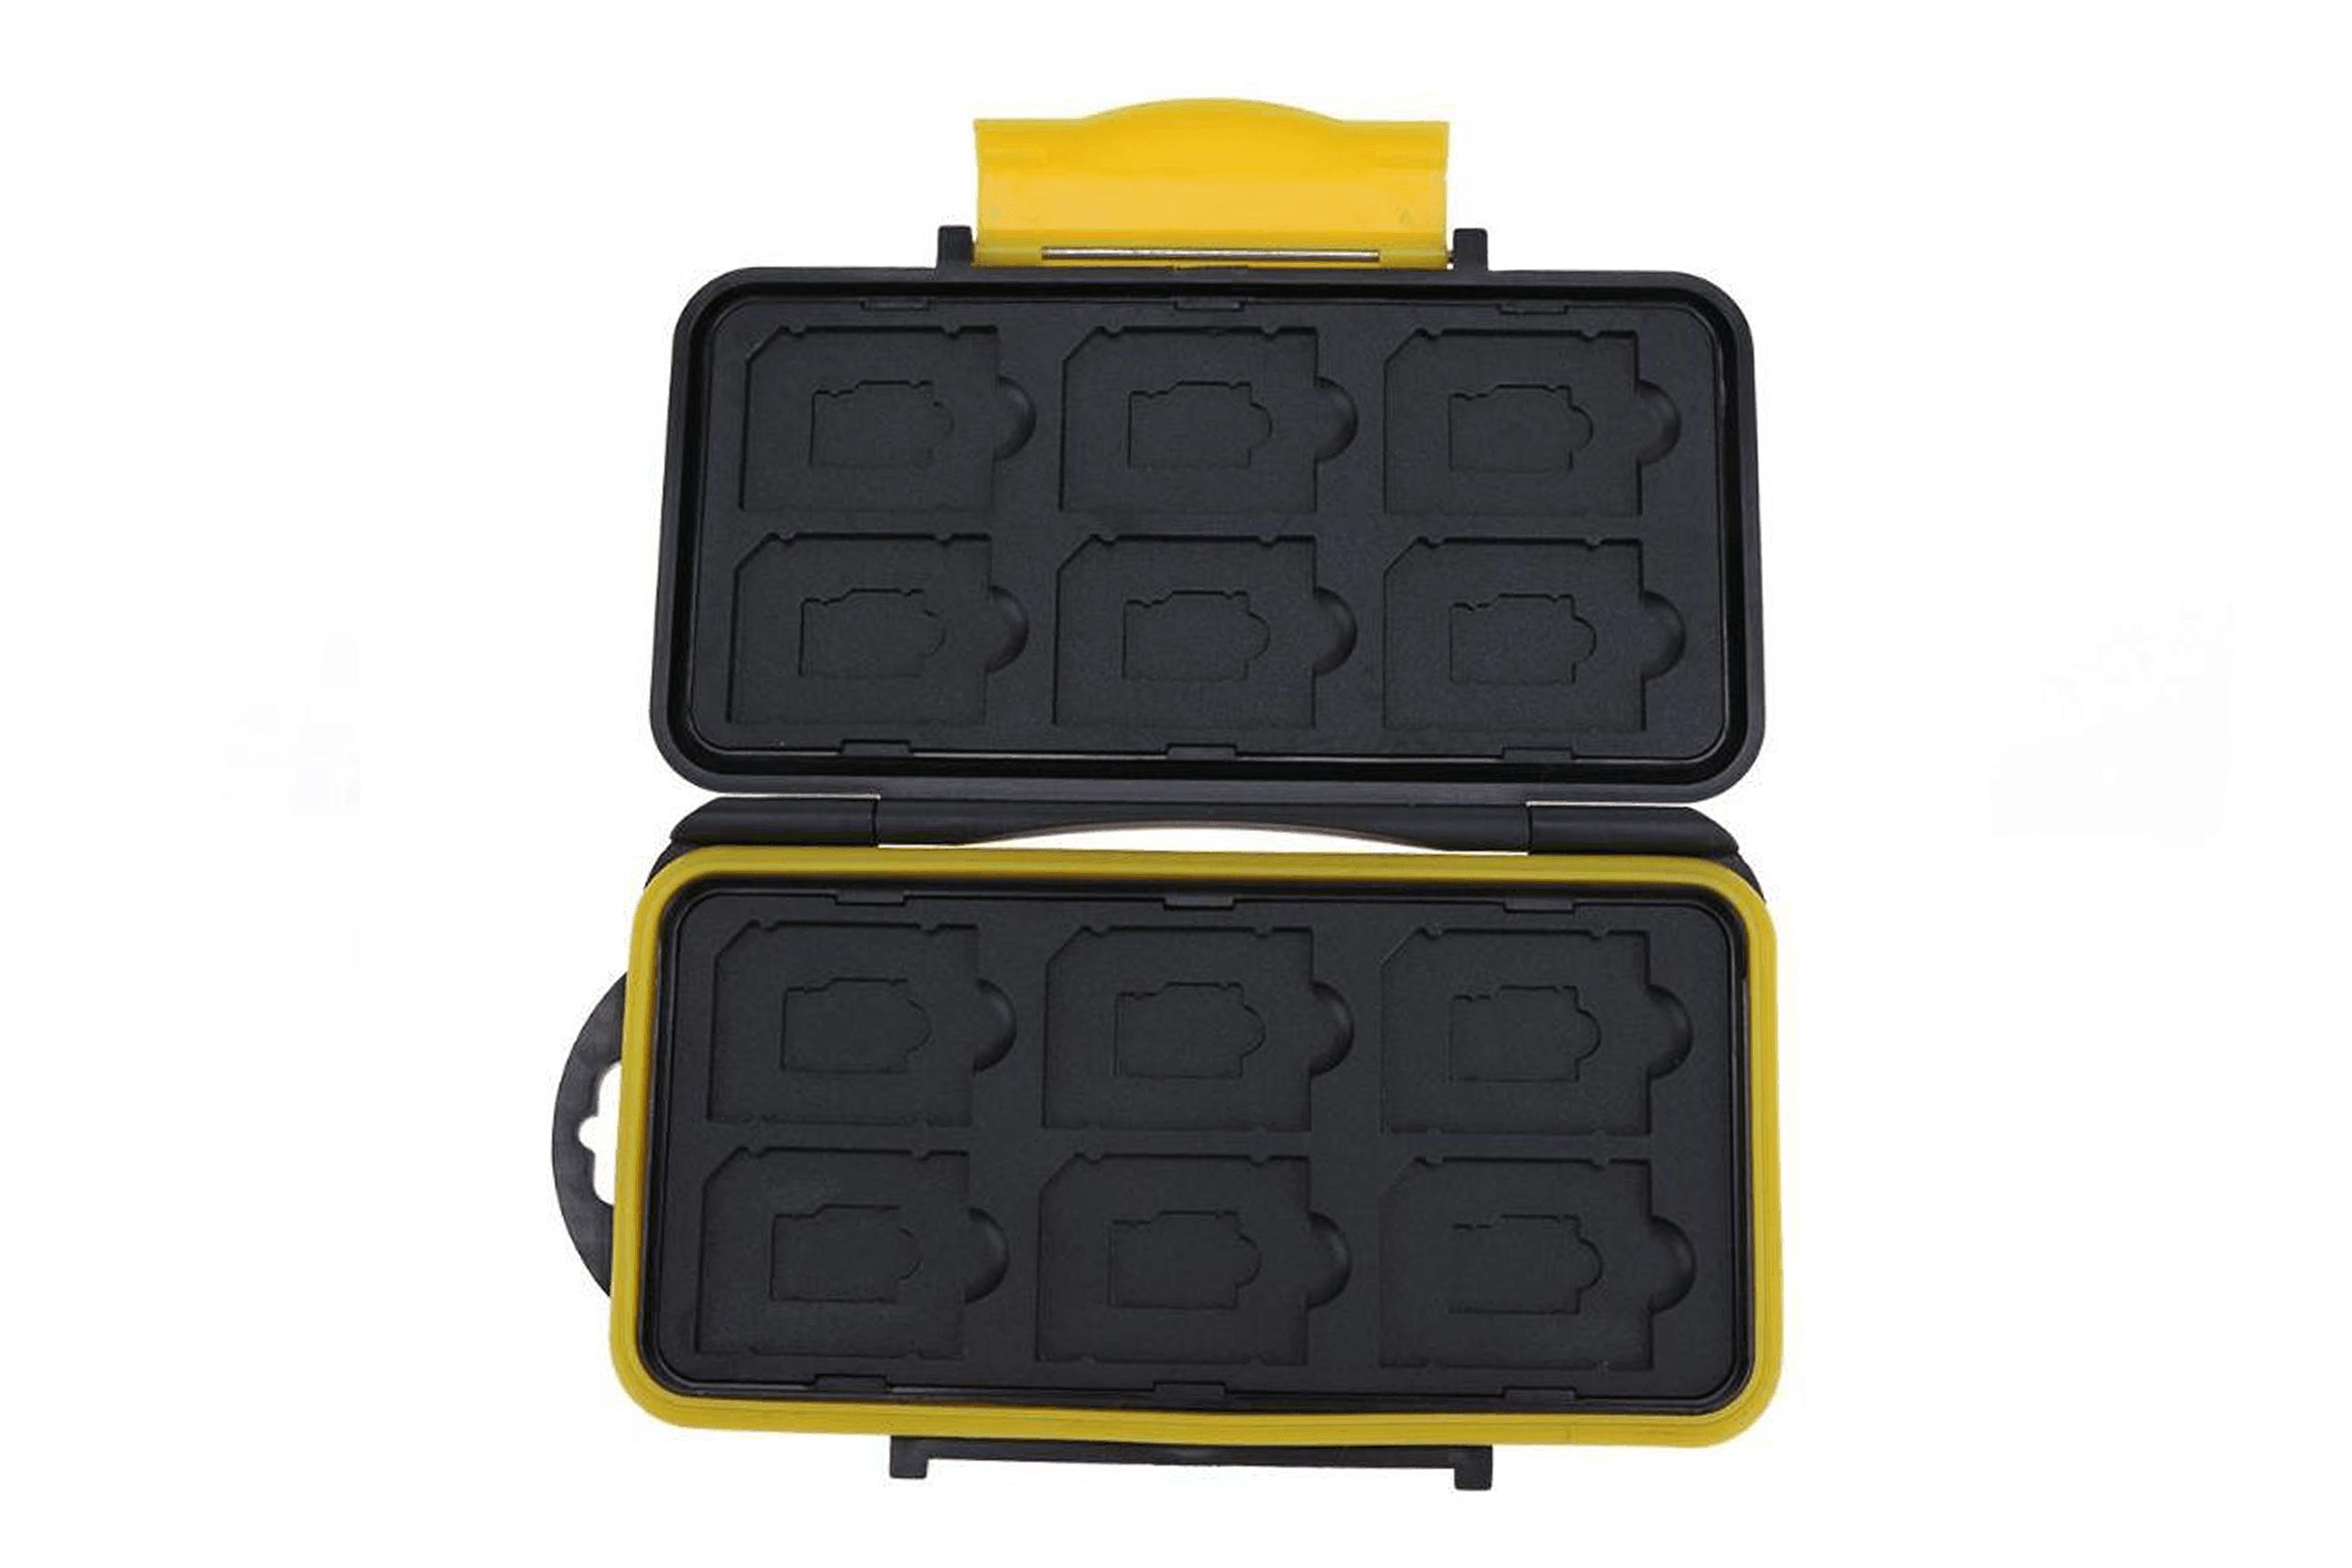 Deyard Waterproof Memory Card Case : 24 Slots for 12 SDHC/SDXC Cards and 12  Micro SD Cards